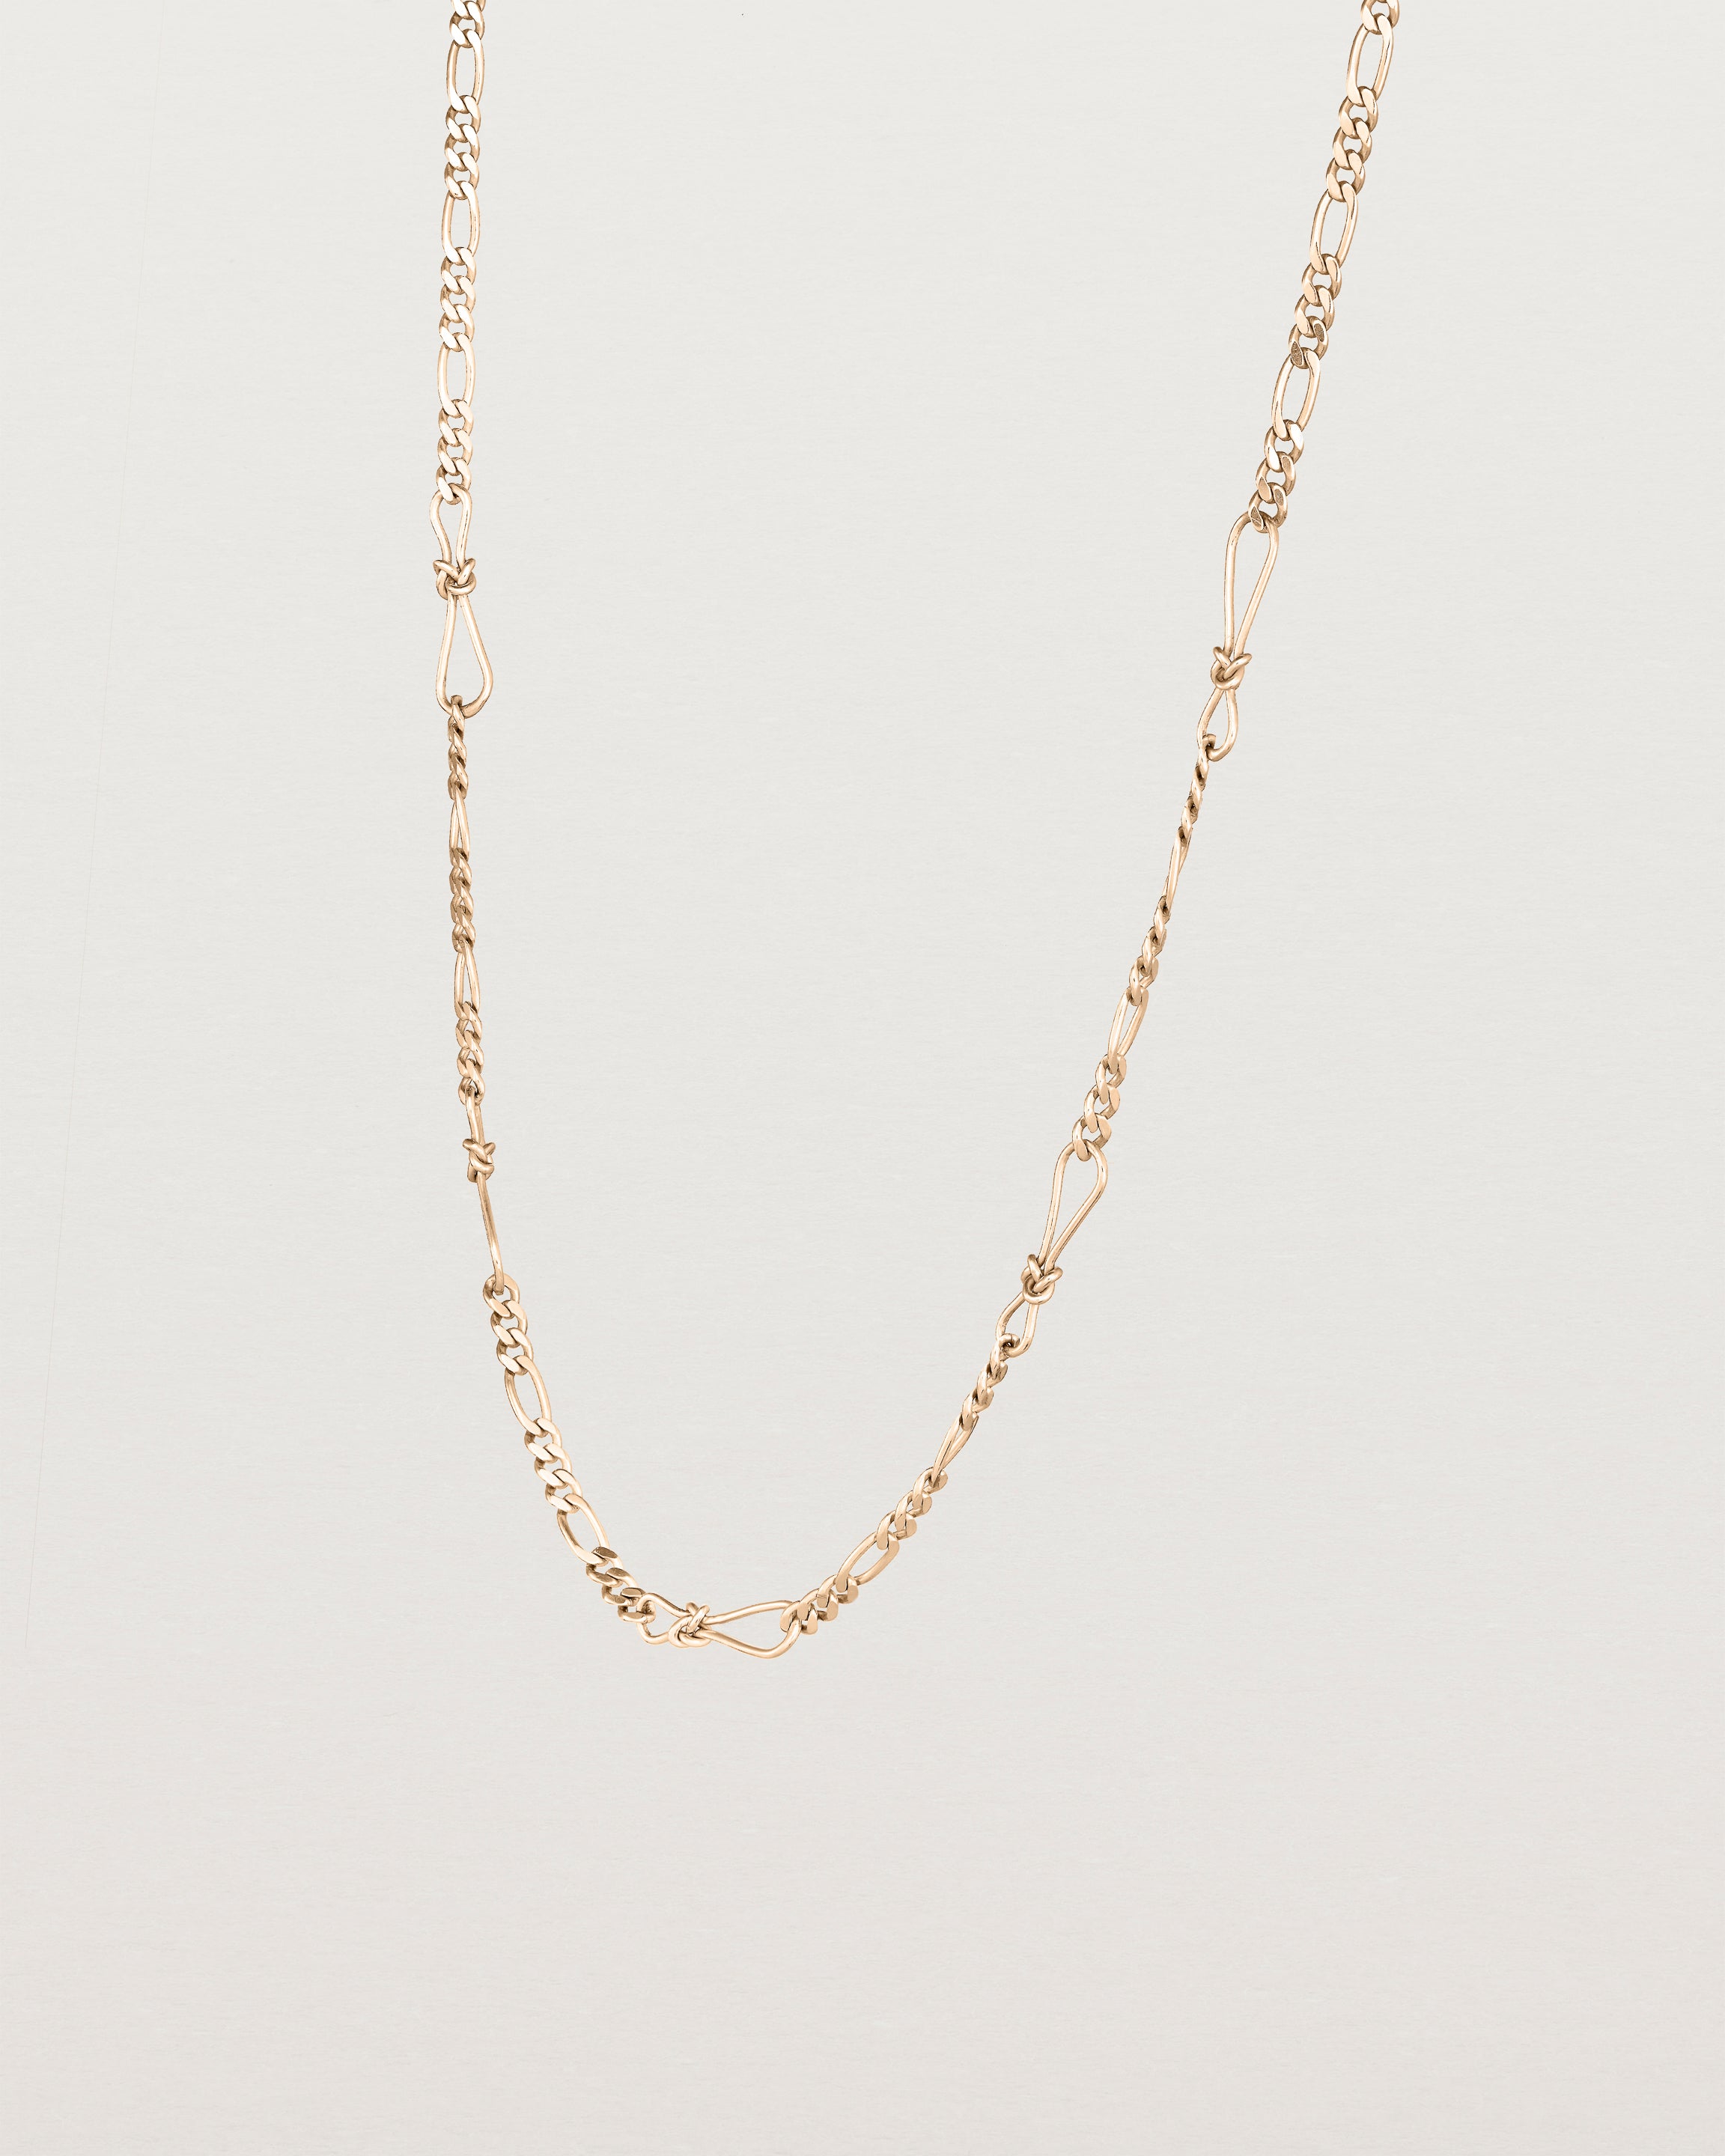 Angled view of the Anam Charm Necklace in Rose Gold.